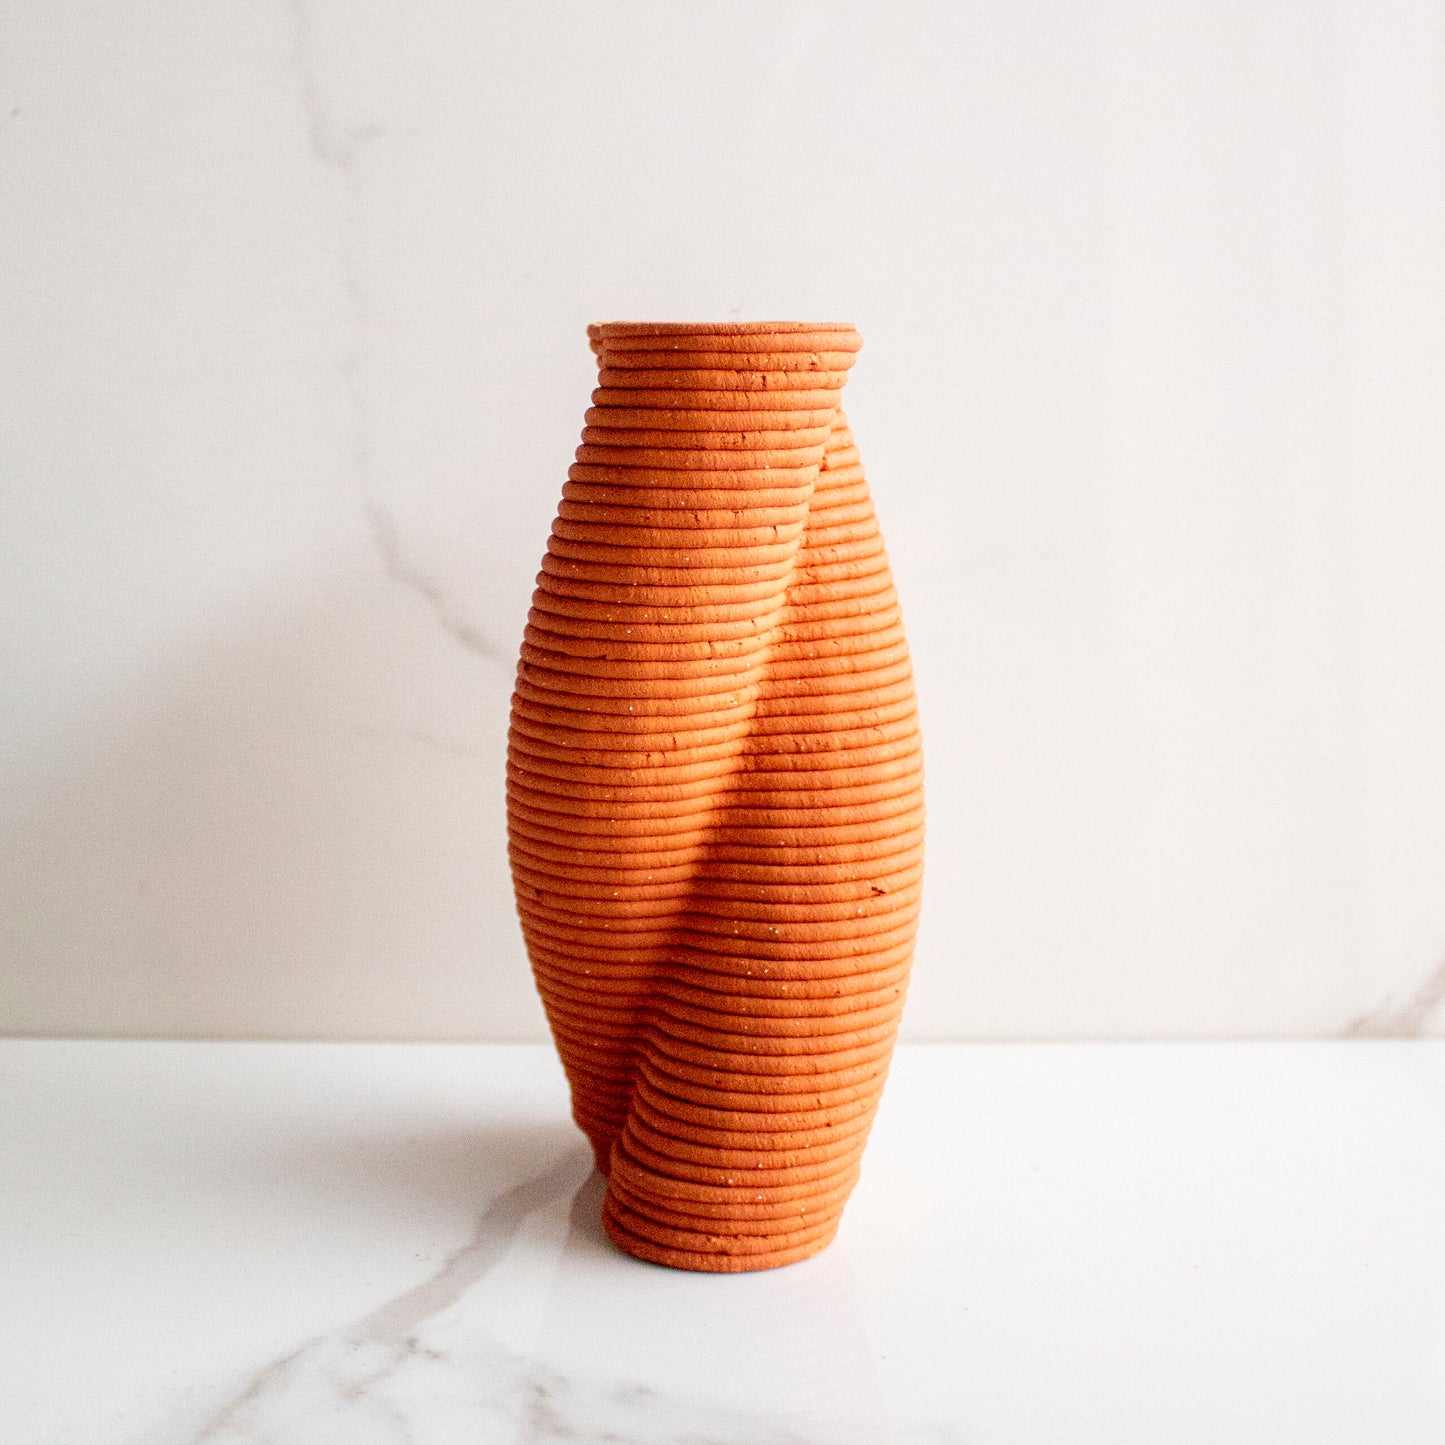 The Brown and Twisted Vol. IV Vase